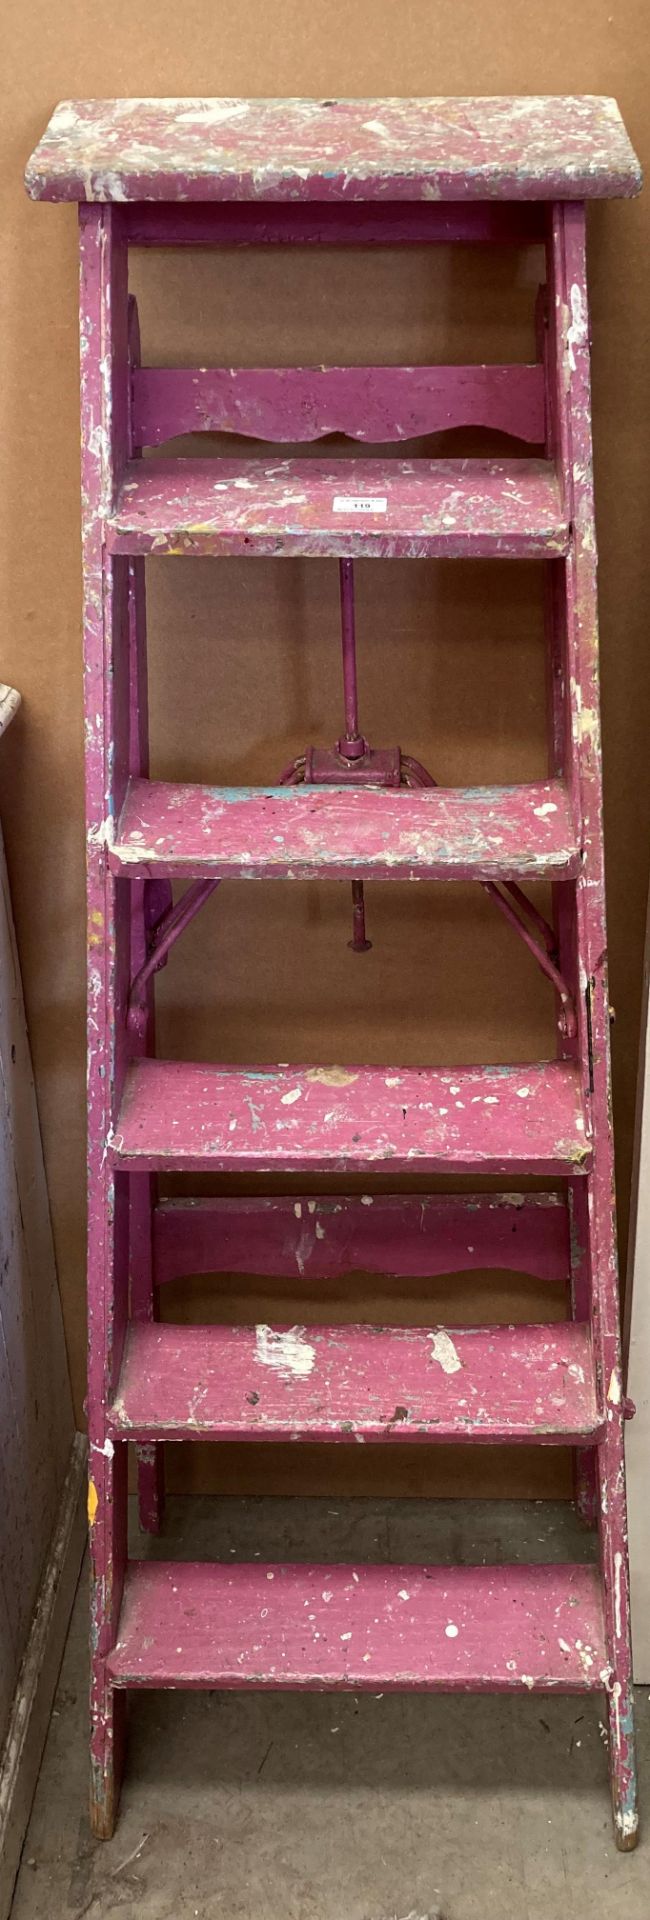 A Pioneer ladder pink painted five step wooden step ladder - Image 4 of 5